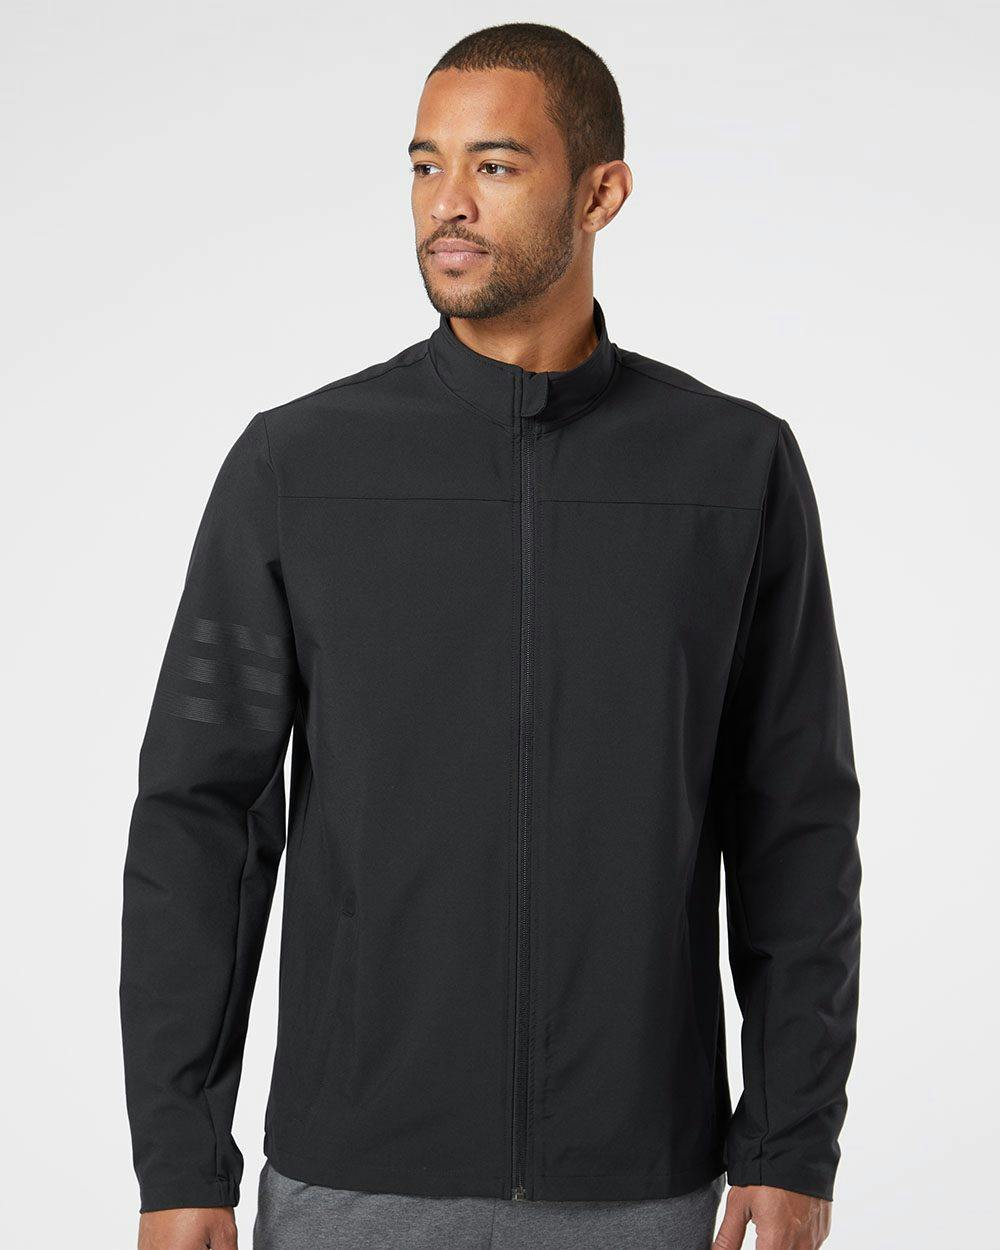 Image for 3-Stripes Full-Zip Jacket - A267